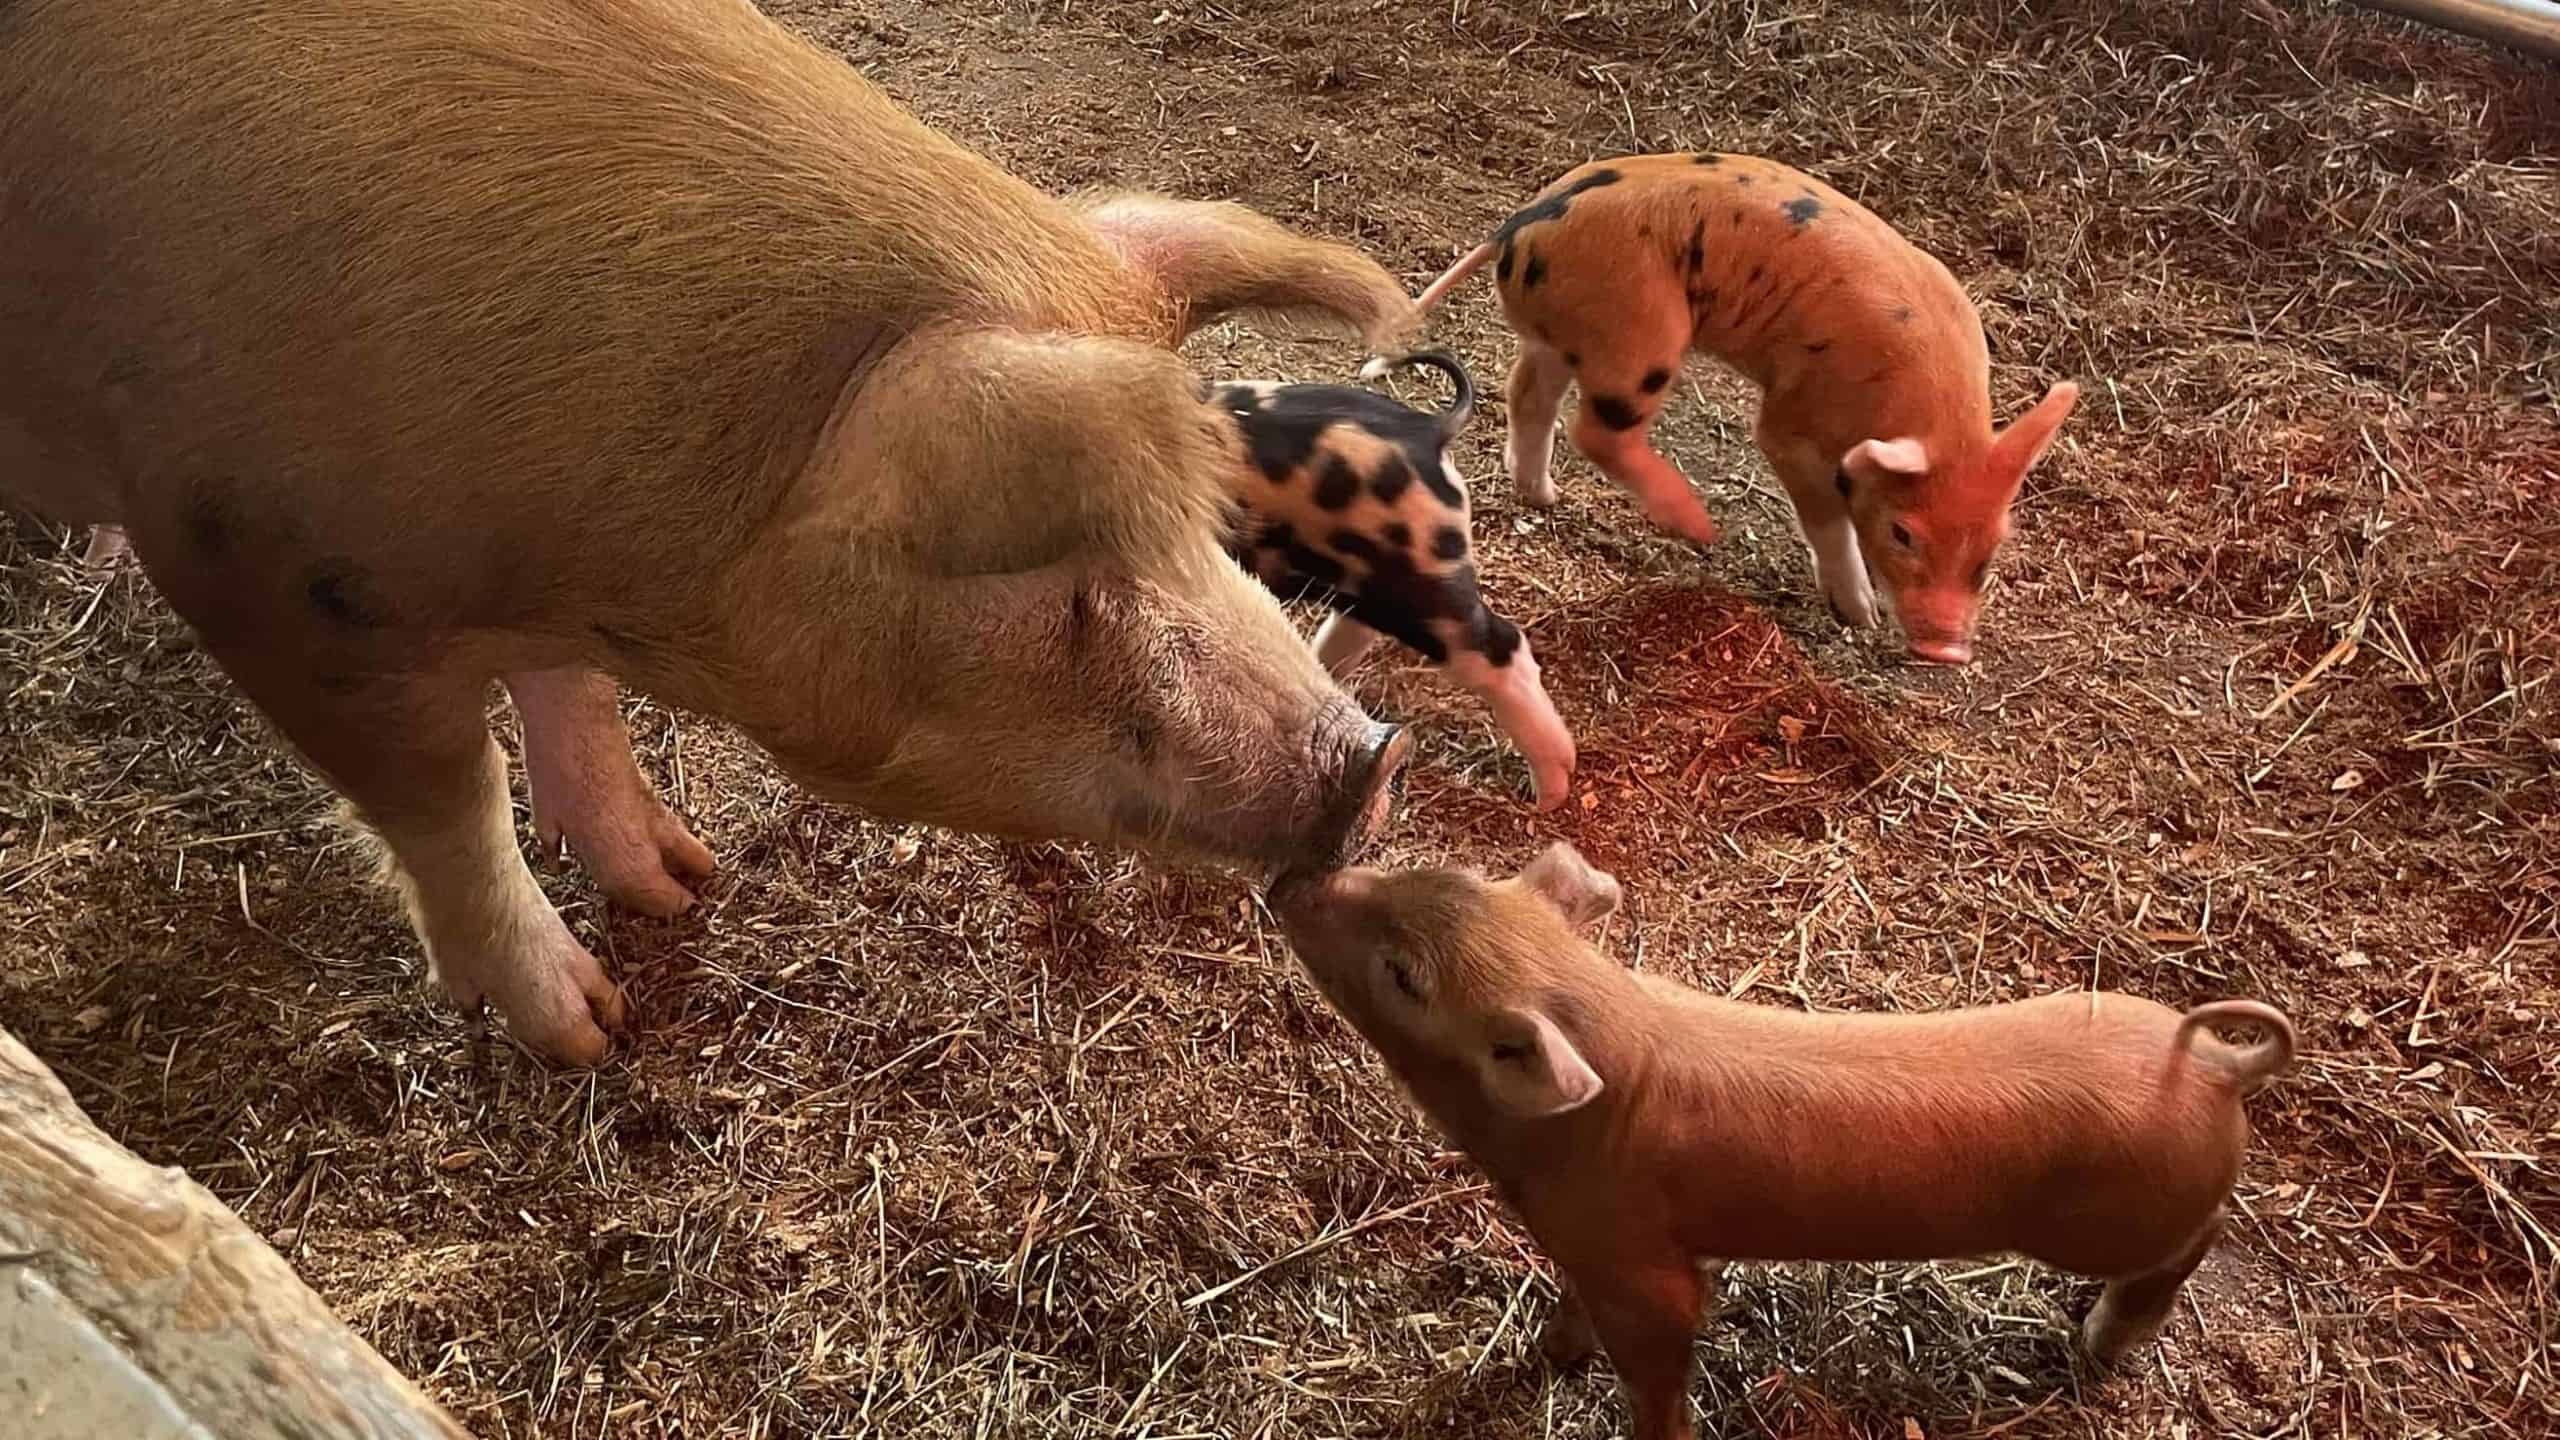 A sow touches noses with a piglet at the annual baby animals festival at Hancock Shaker Village.